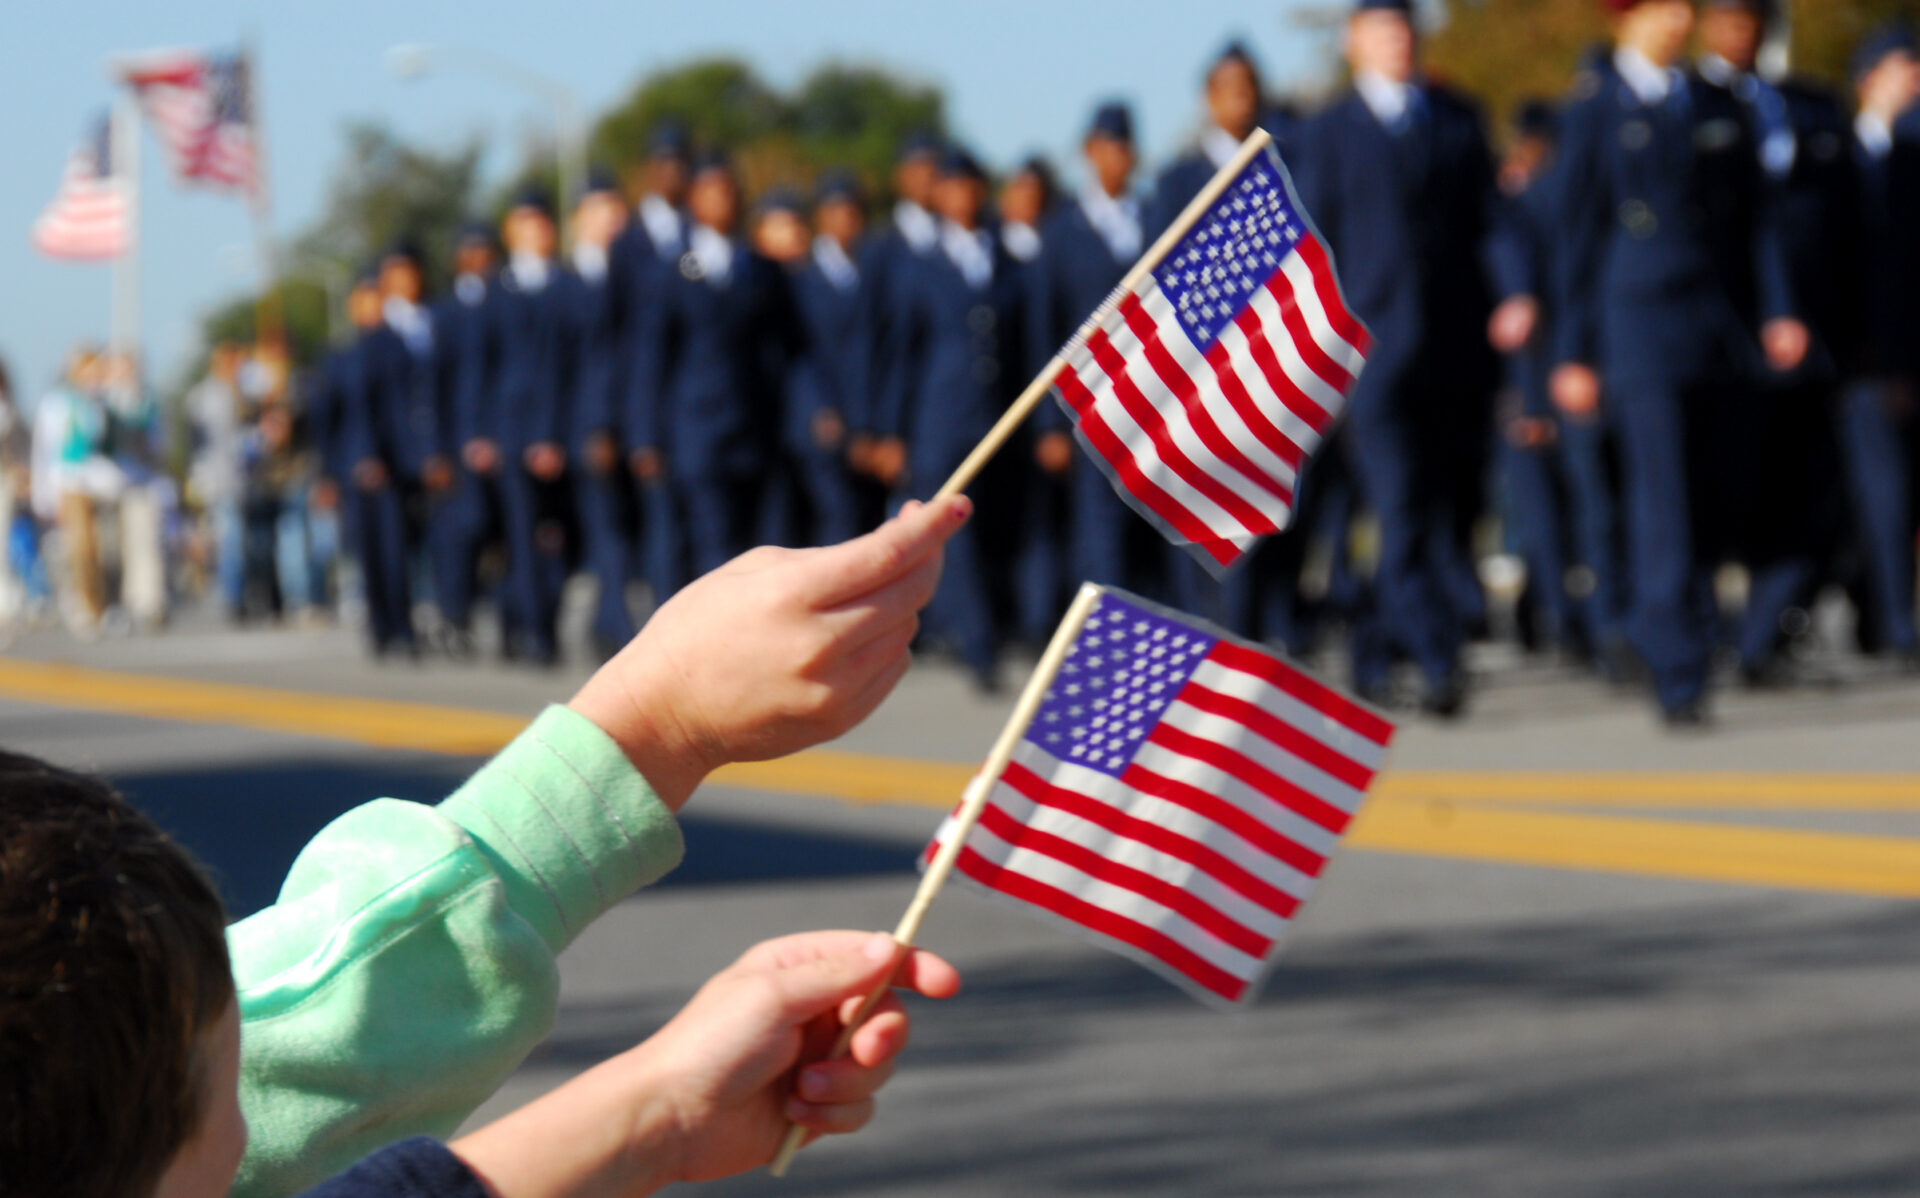 American flags are waved during a Veterans Day parade.